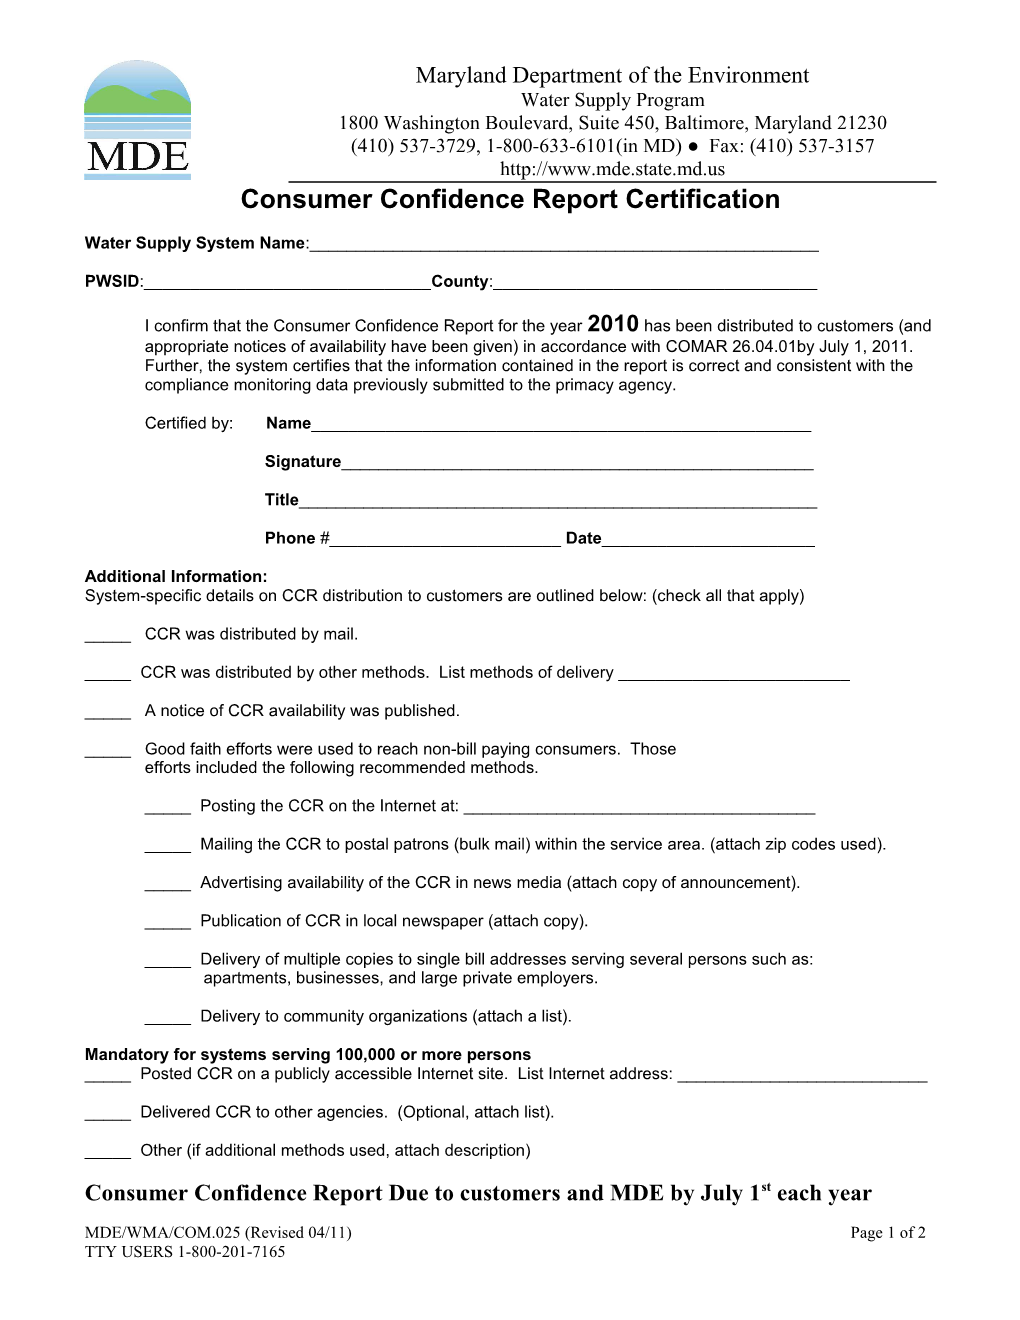 MARYLAND DEPARTMENT of the ENVIRONMENT CCR Cert Form